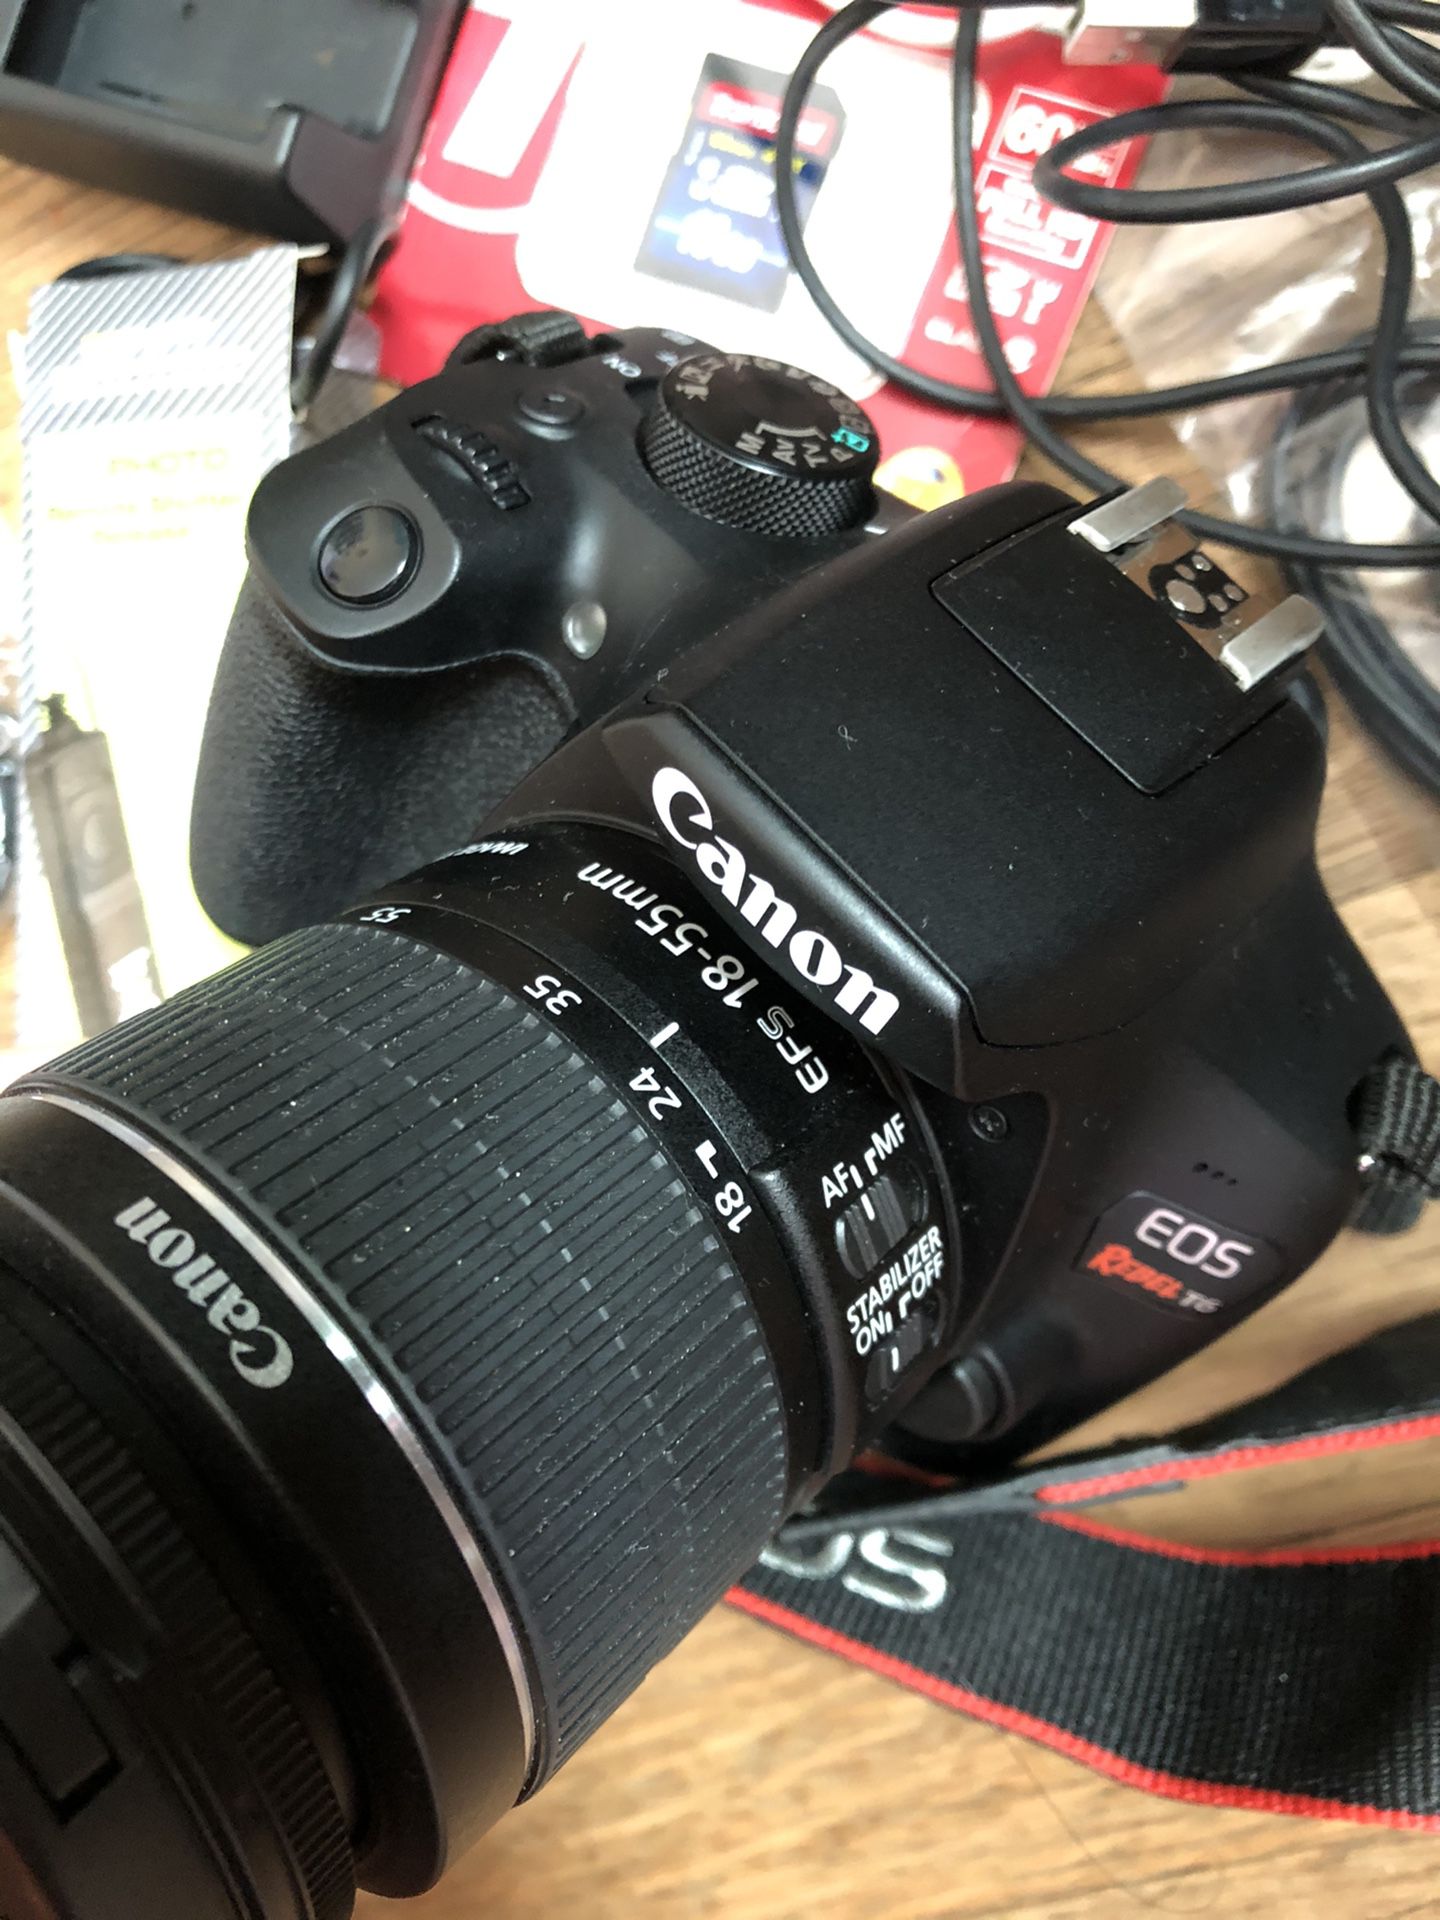 Canon EOS Rebel T6 DSLR Camera with EF-S 18-55mm f/3.5-5.6